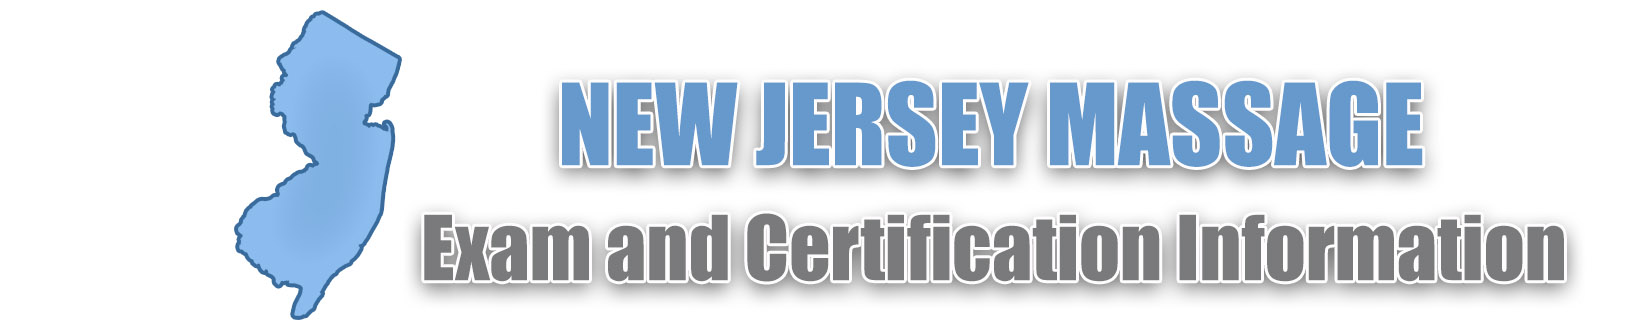 New Jersey 2019 Massage Therapy License And Board Certification Information